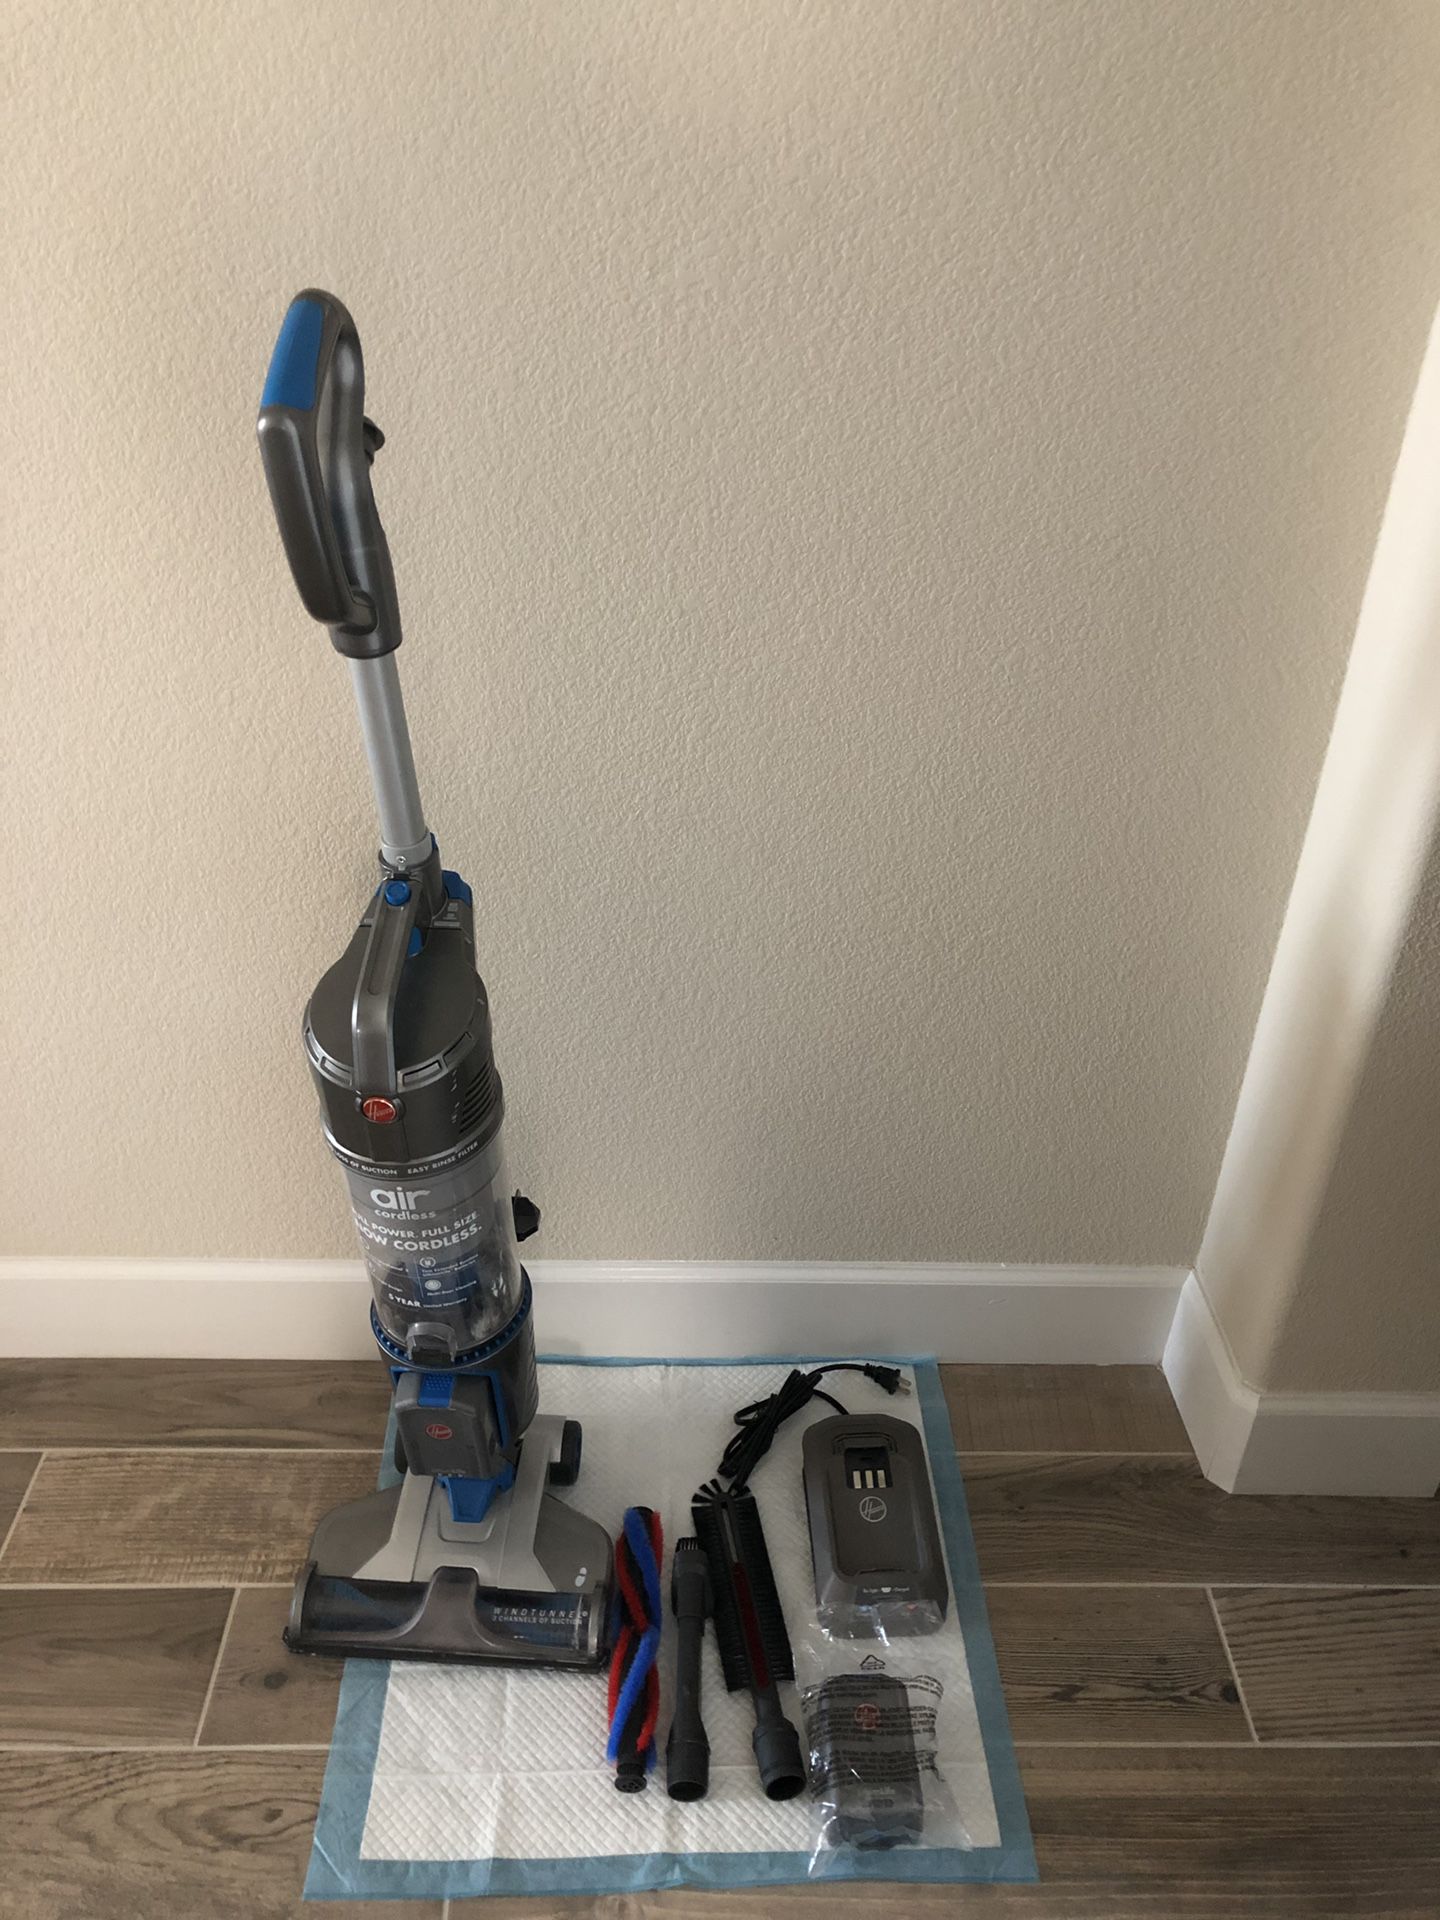 Hoover air cordless 20 volt lithium ion bagless upright vacuum cleaner